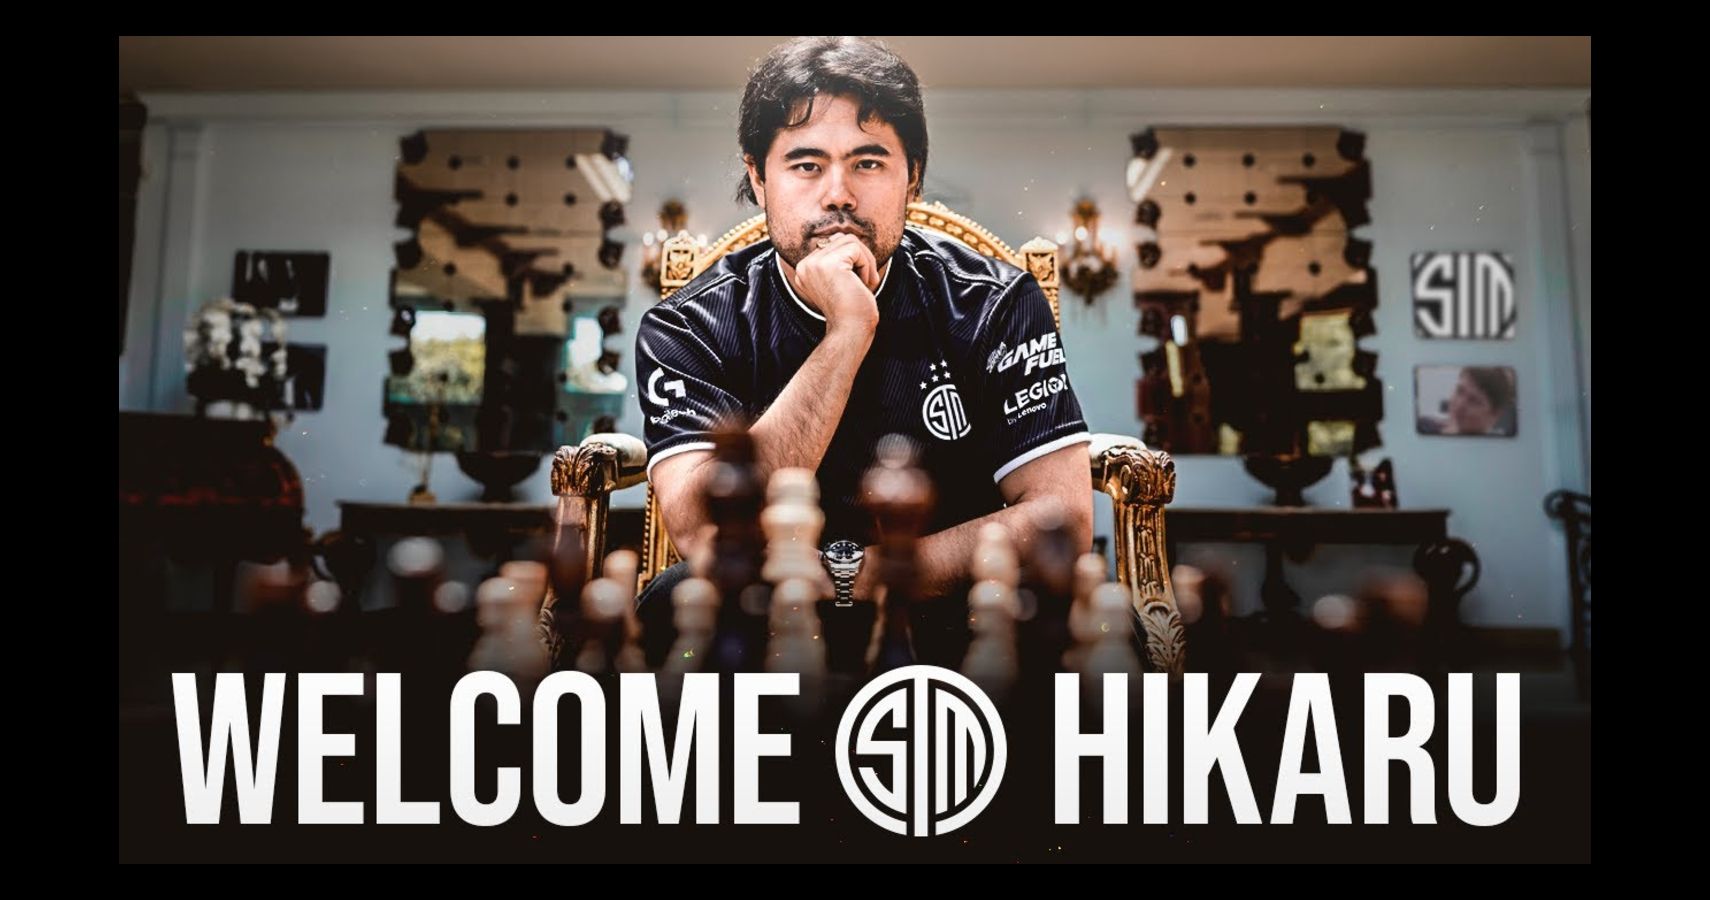 Chess Is The New Fortnite. Rise of Hikaru on Twitch (And How To